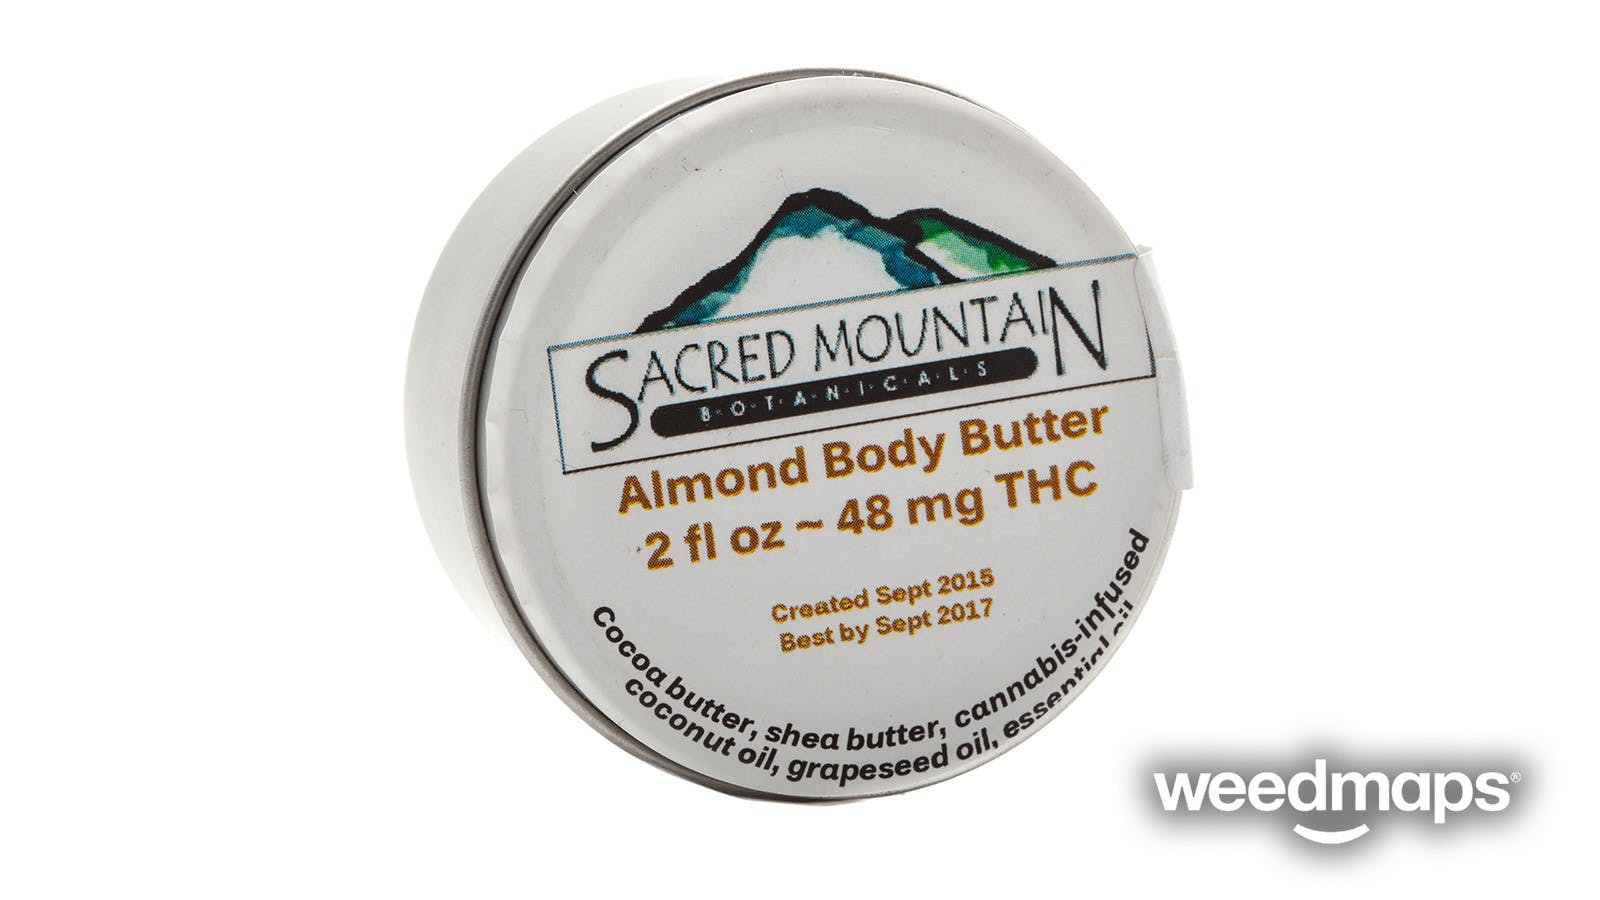 marijuana-dispensaries-6039-197th-ave-sw-grand-mound-almond-body-butter-by-sacred-mountain